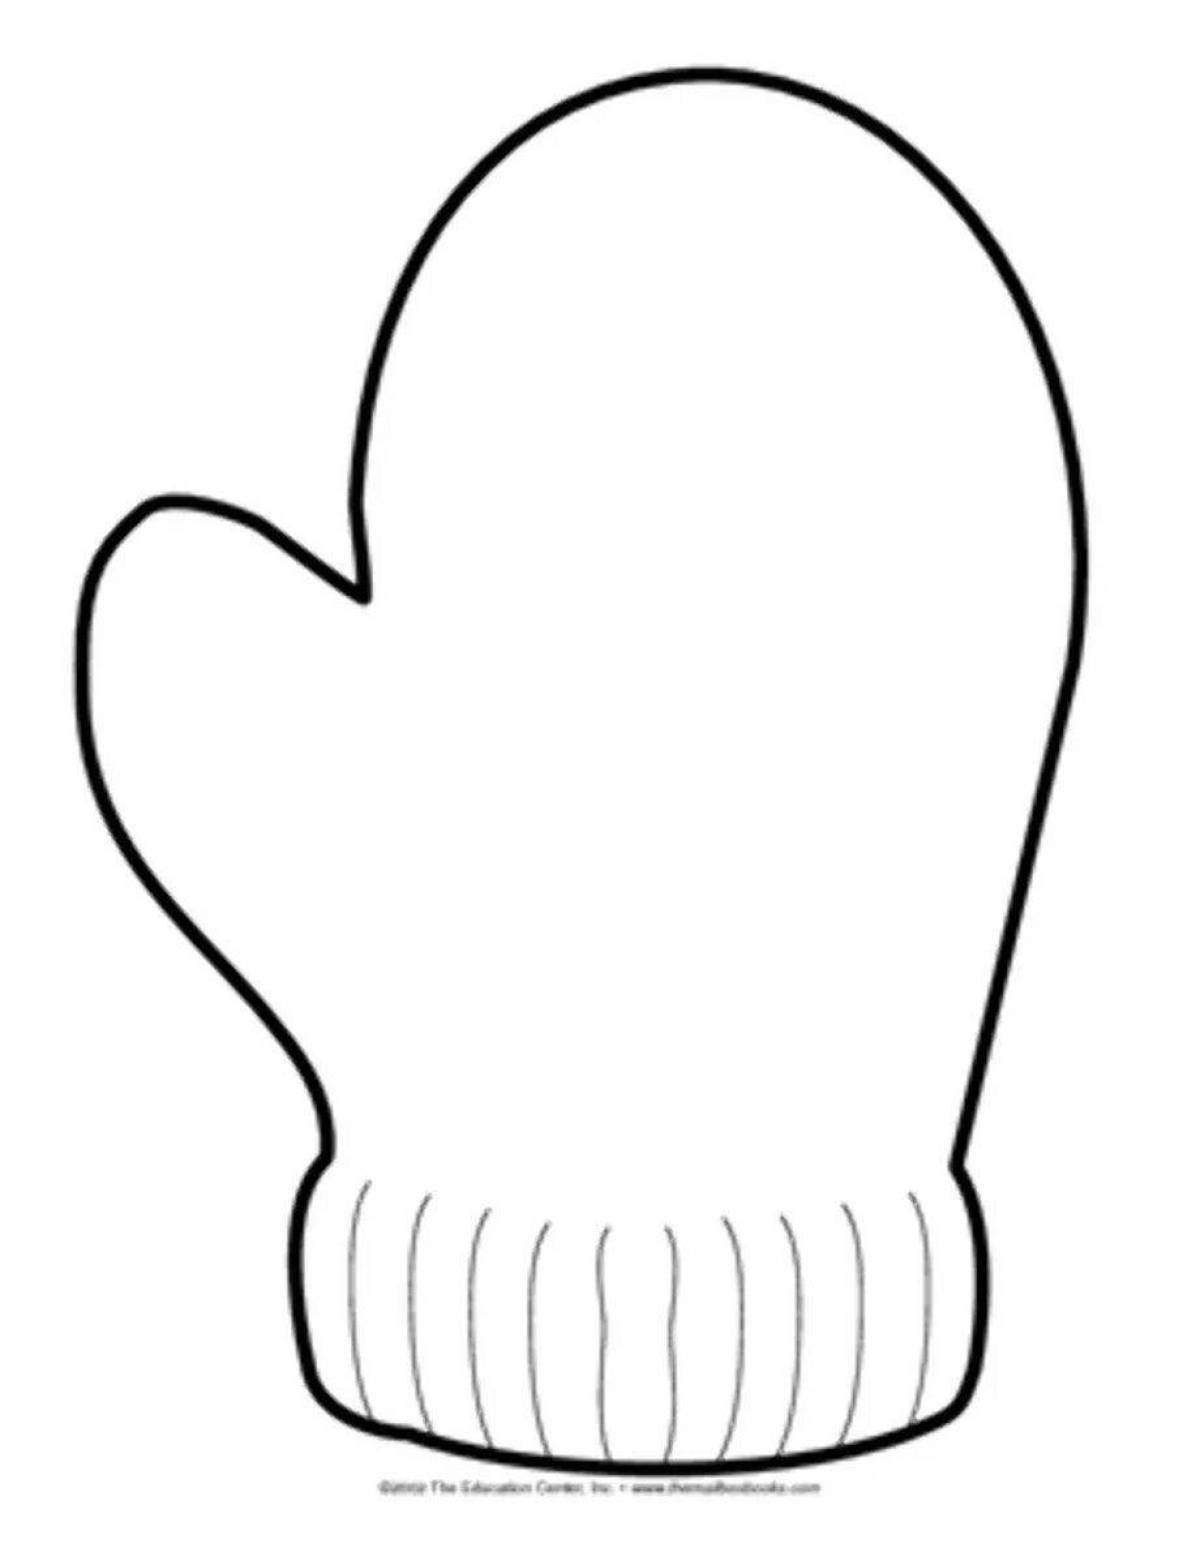 Coloring mittens for children